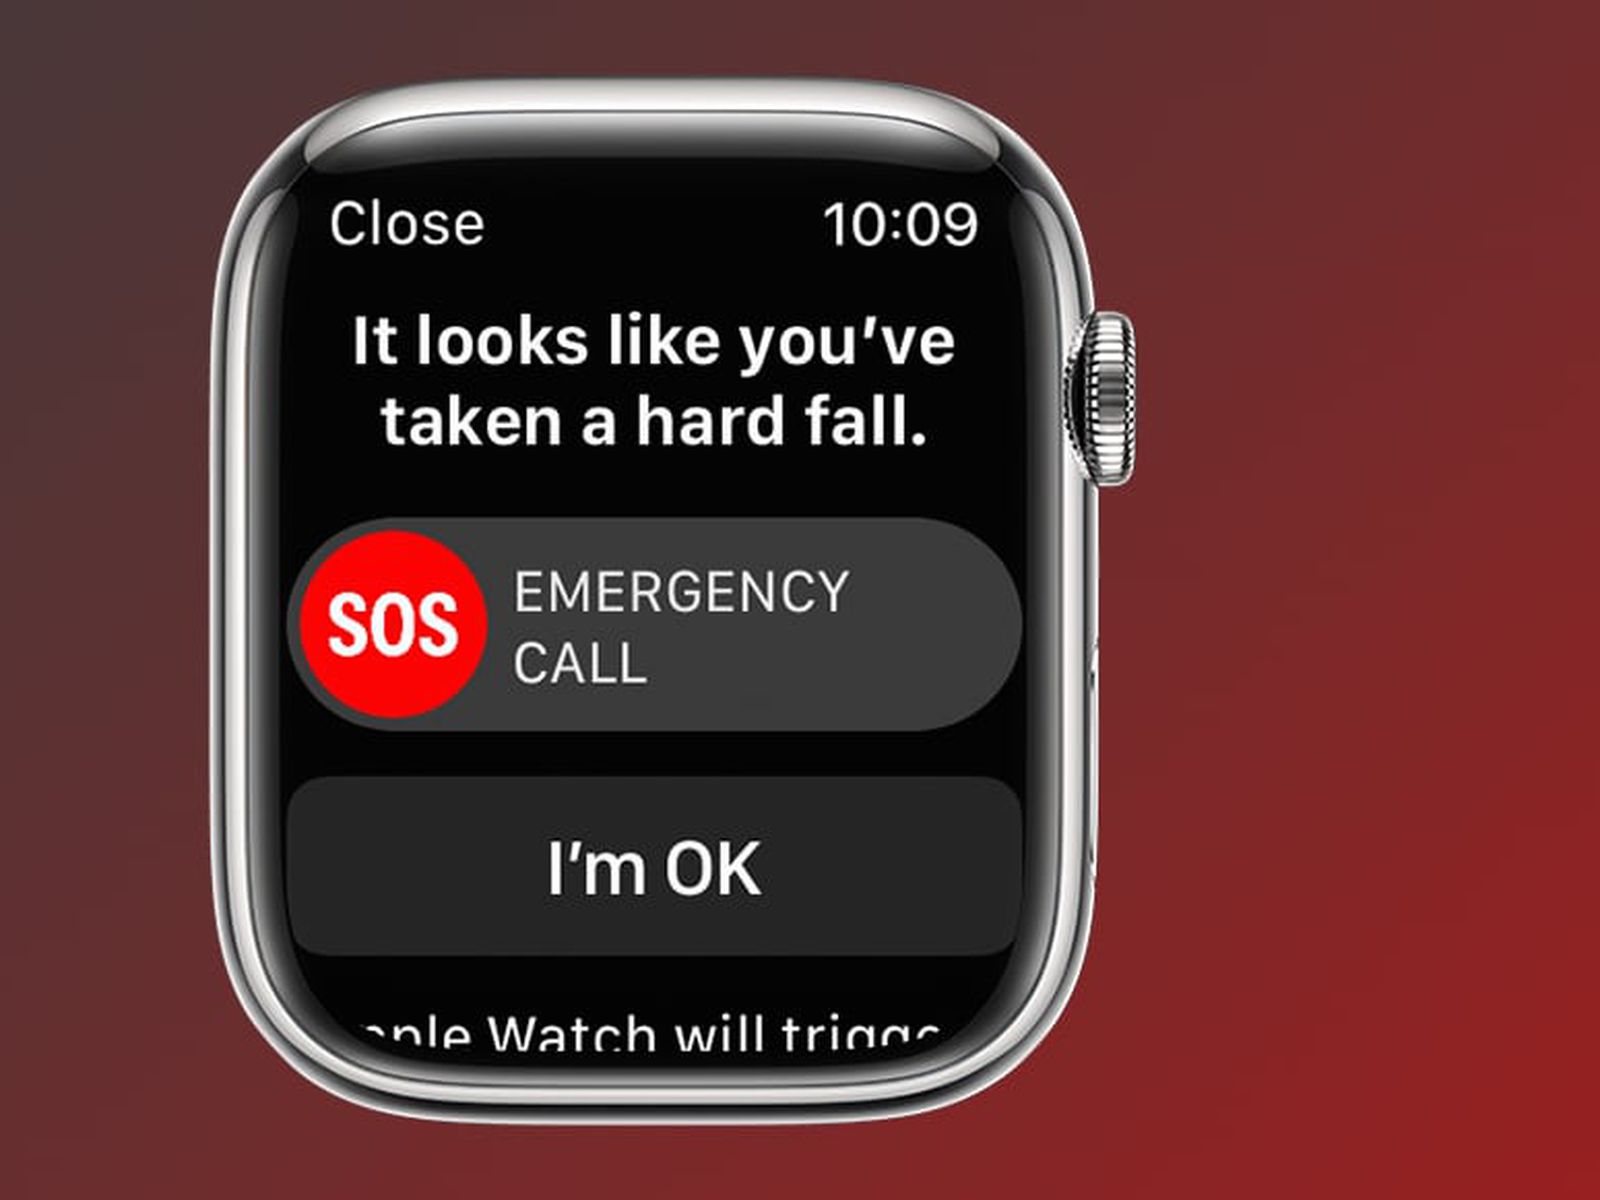 Apple Watch Fall Detection Features Save Two Lives - MacRumors